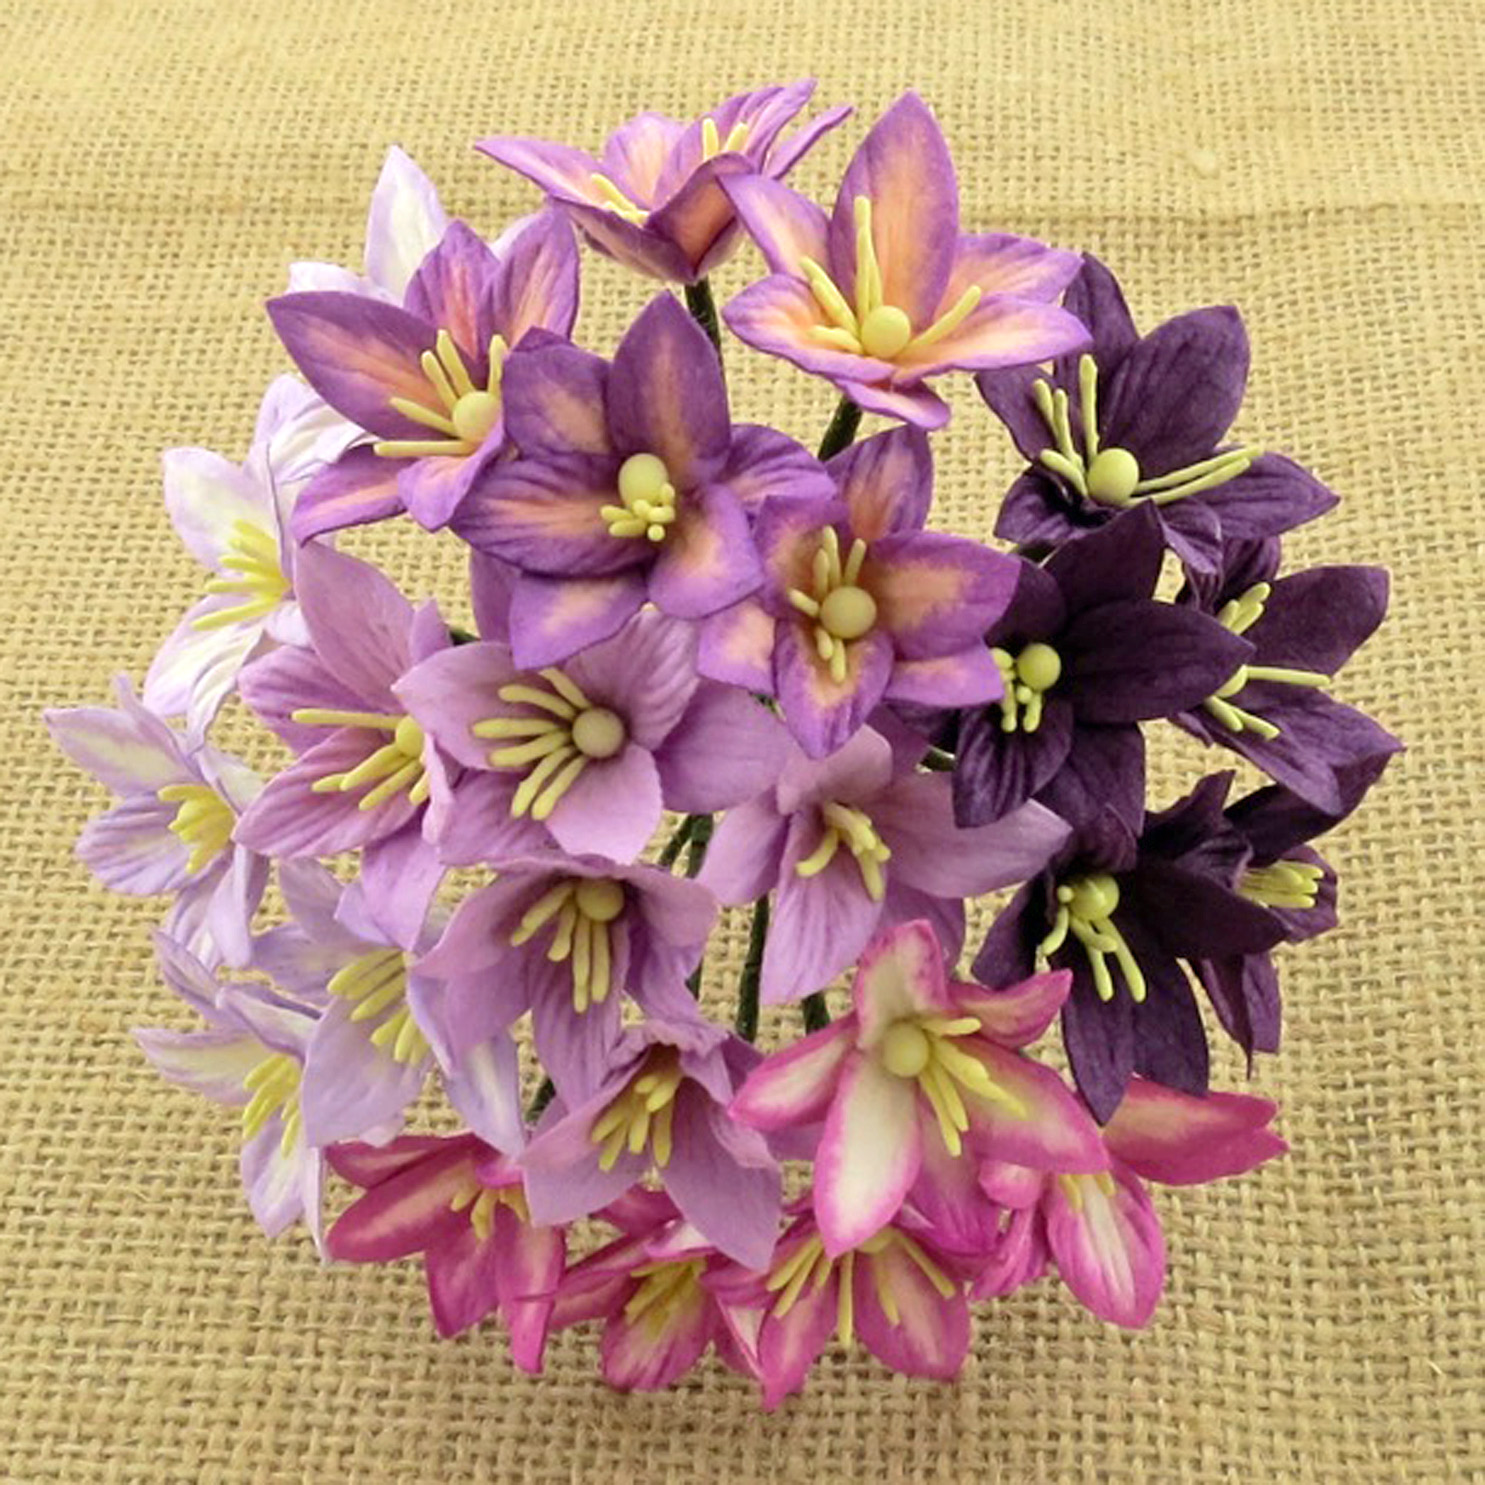 50 MIXED PURPLE/LILAC MULBERRY PAPER LILY FLOWERS - 5 COLOR